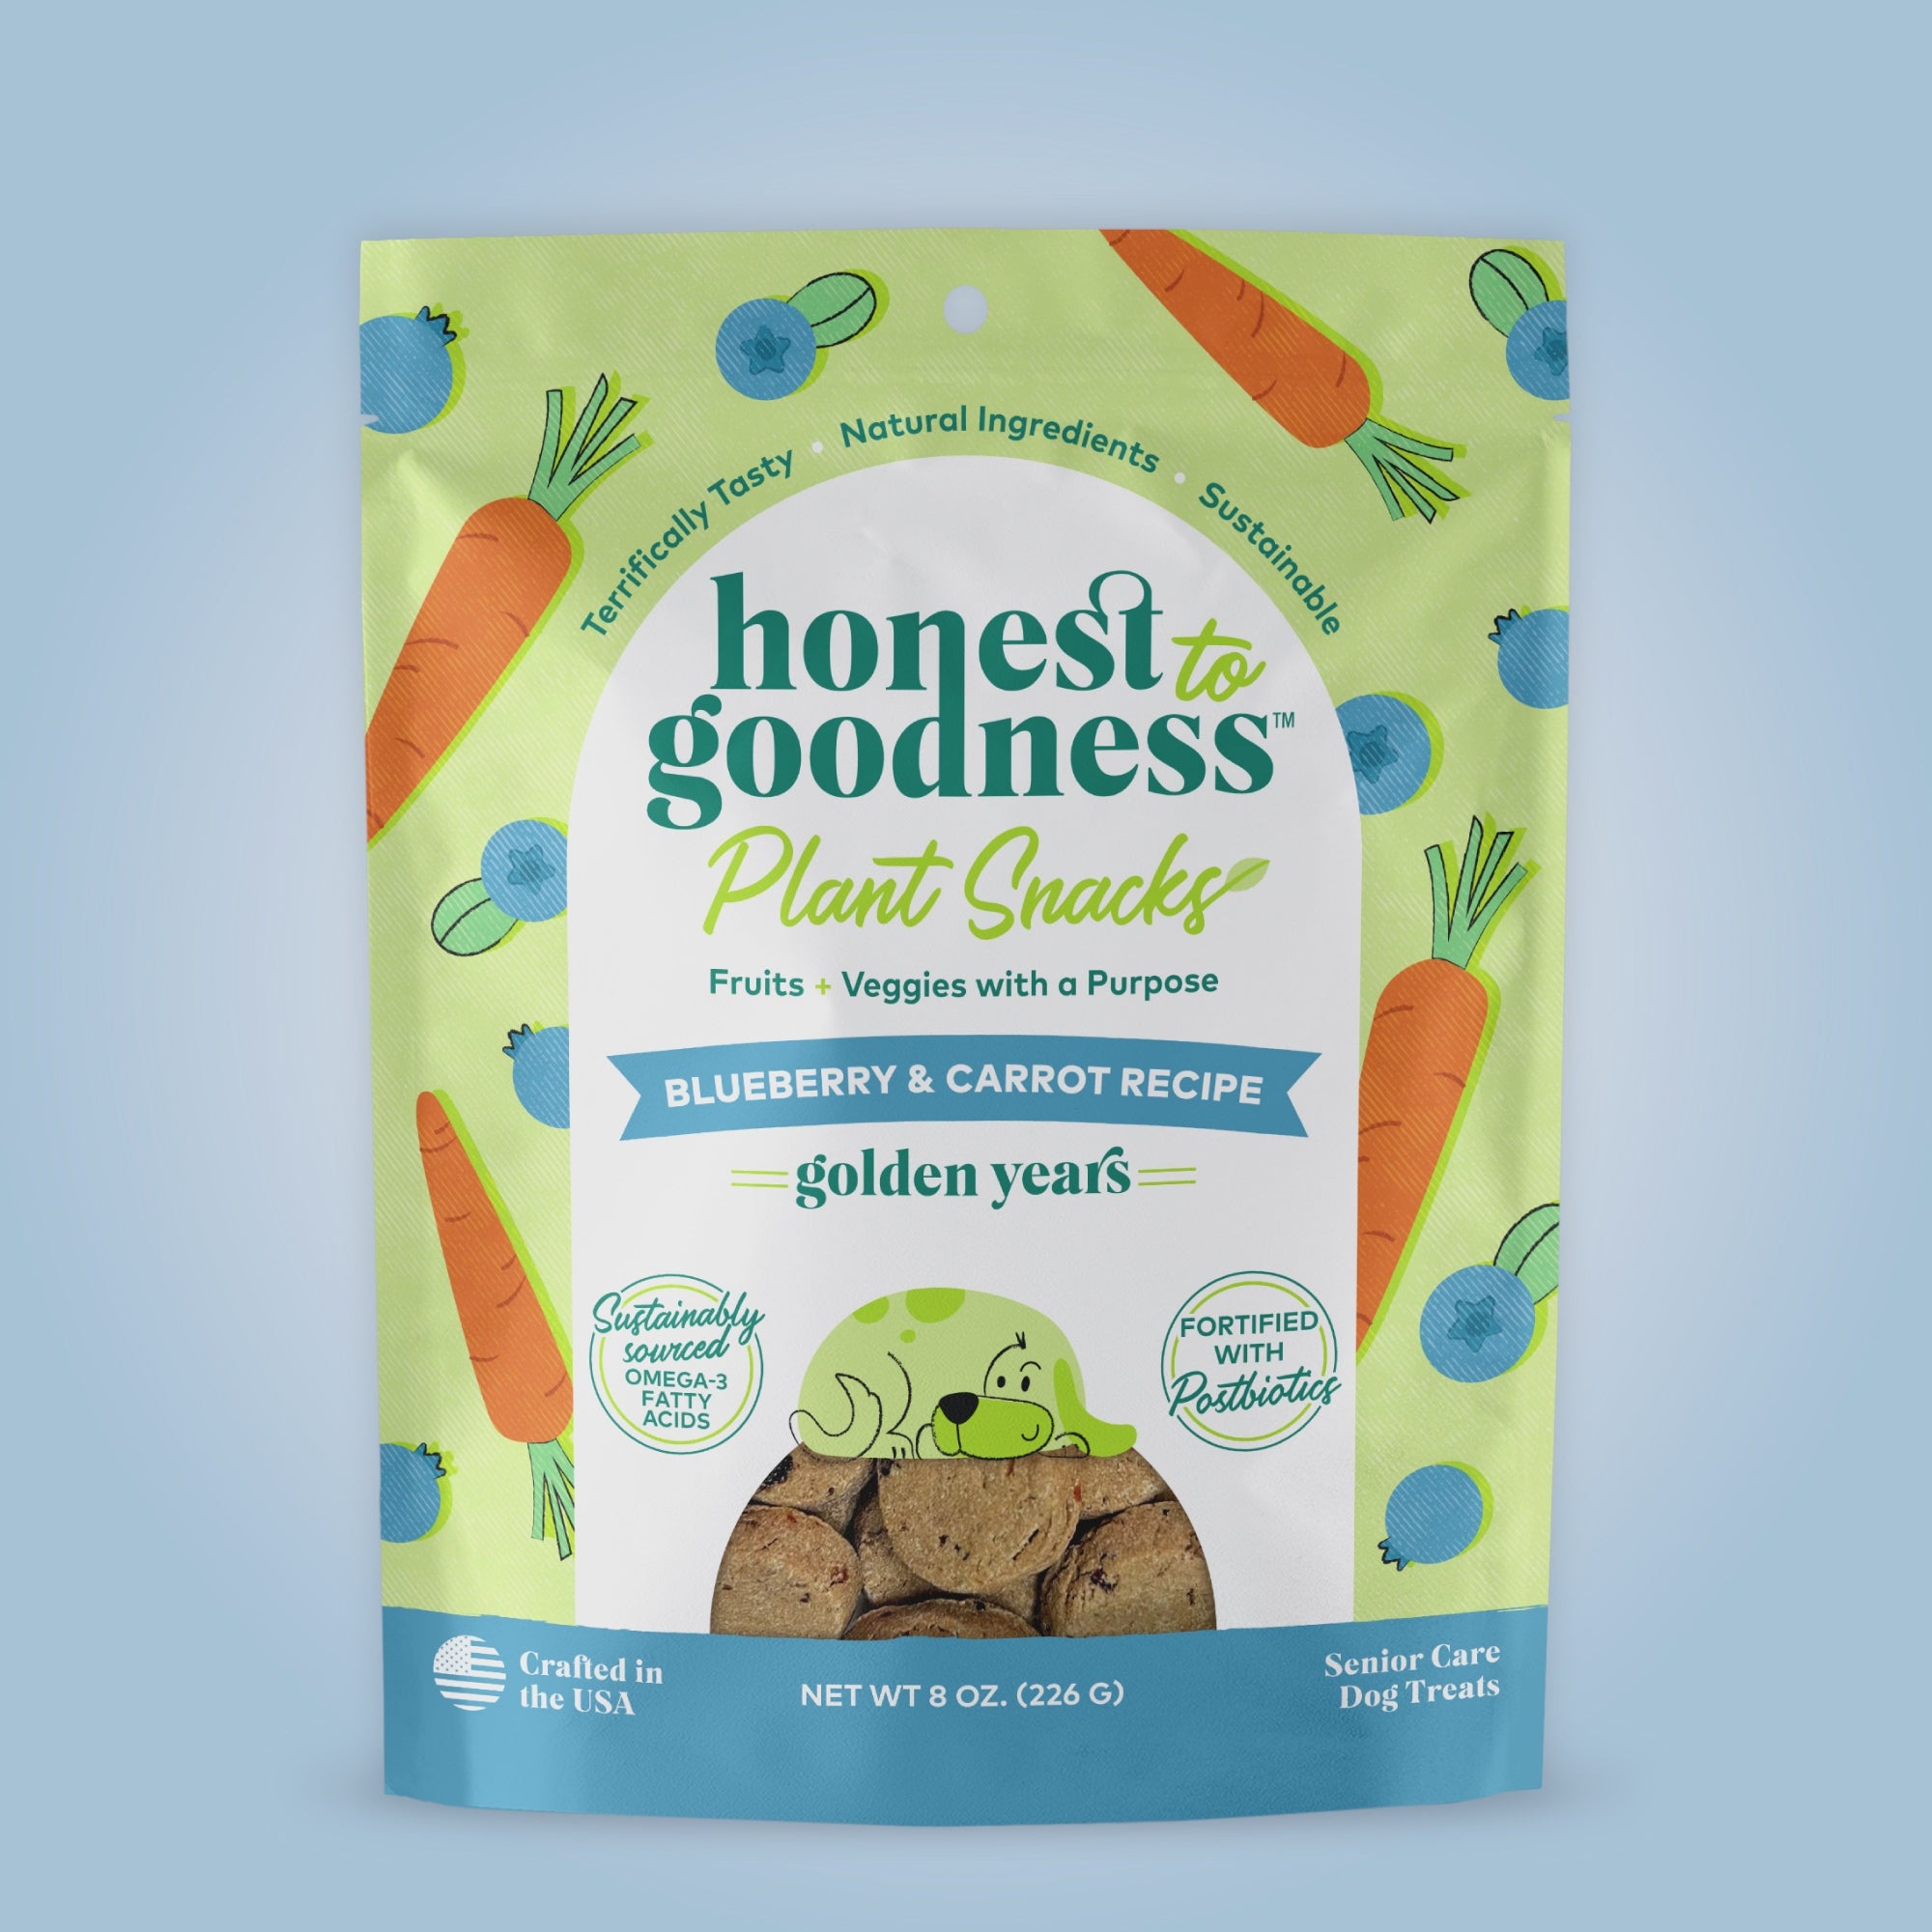 Short video of the ingredients that go into making Honest to Goodness plant snacks for dogs.